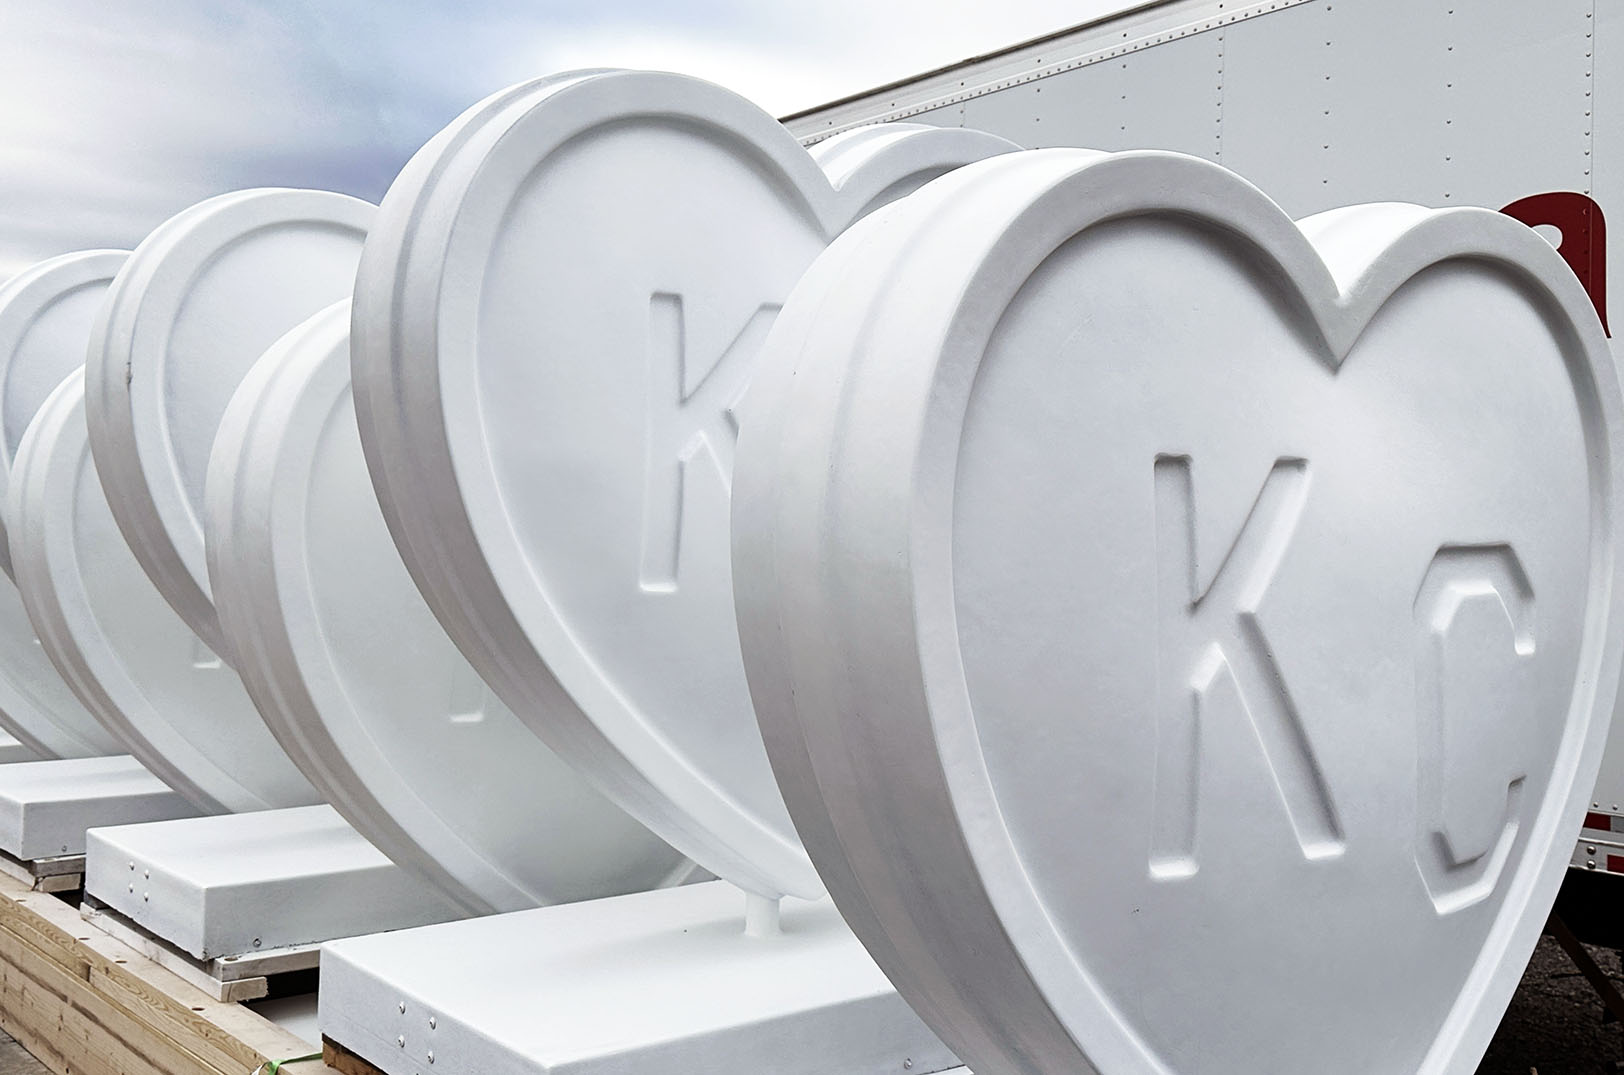 These iconic hearts are blank now, but a parade of artists is set to bring the KC landmarks back in 2023